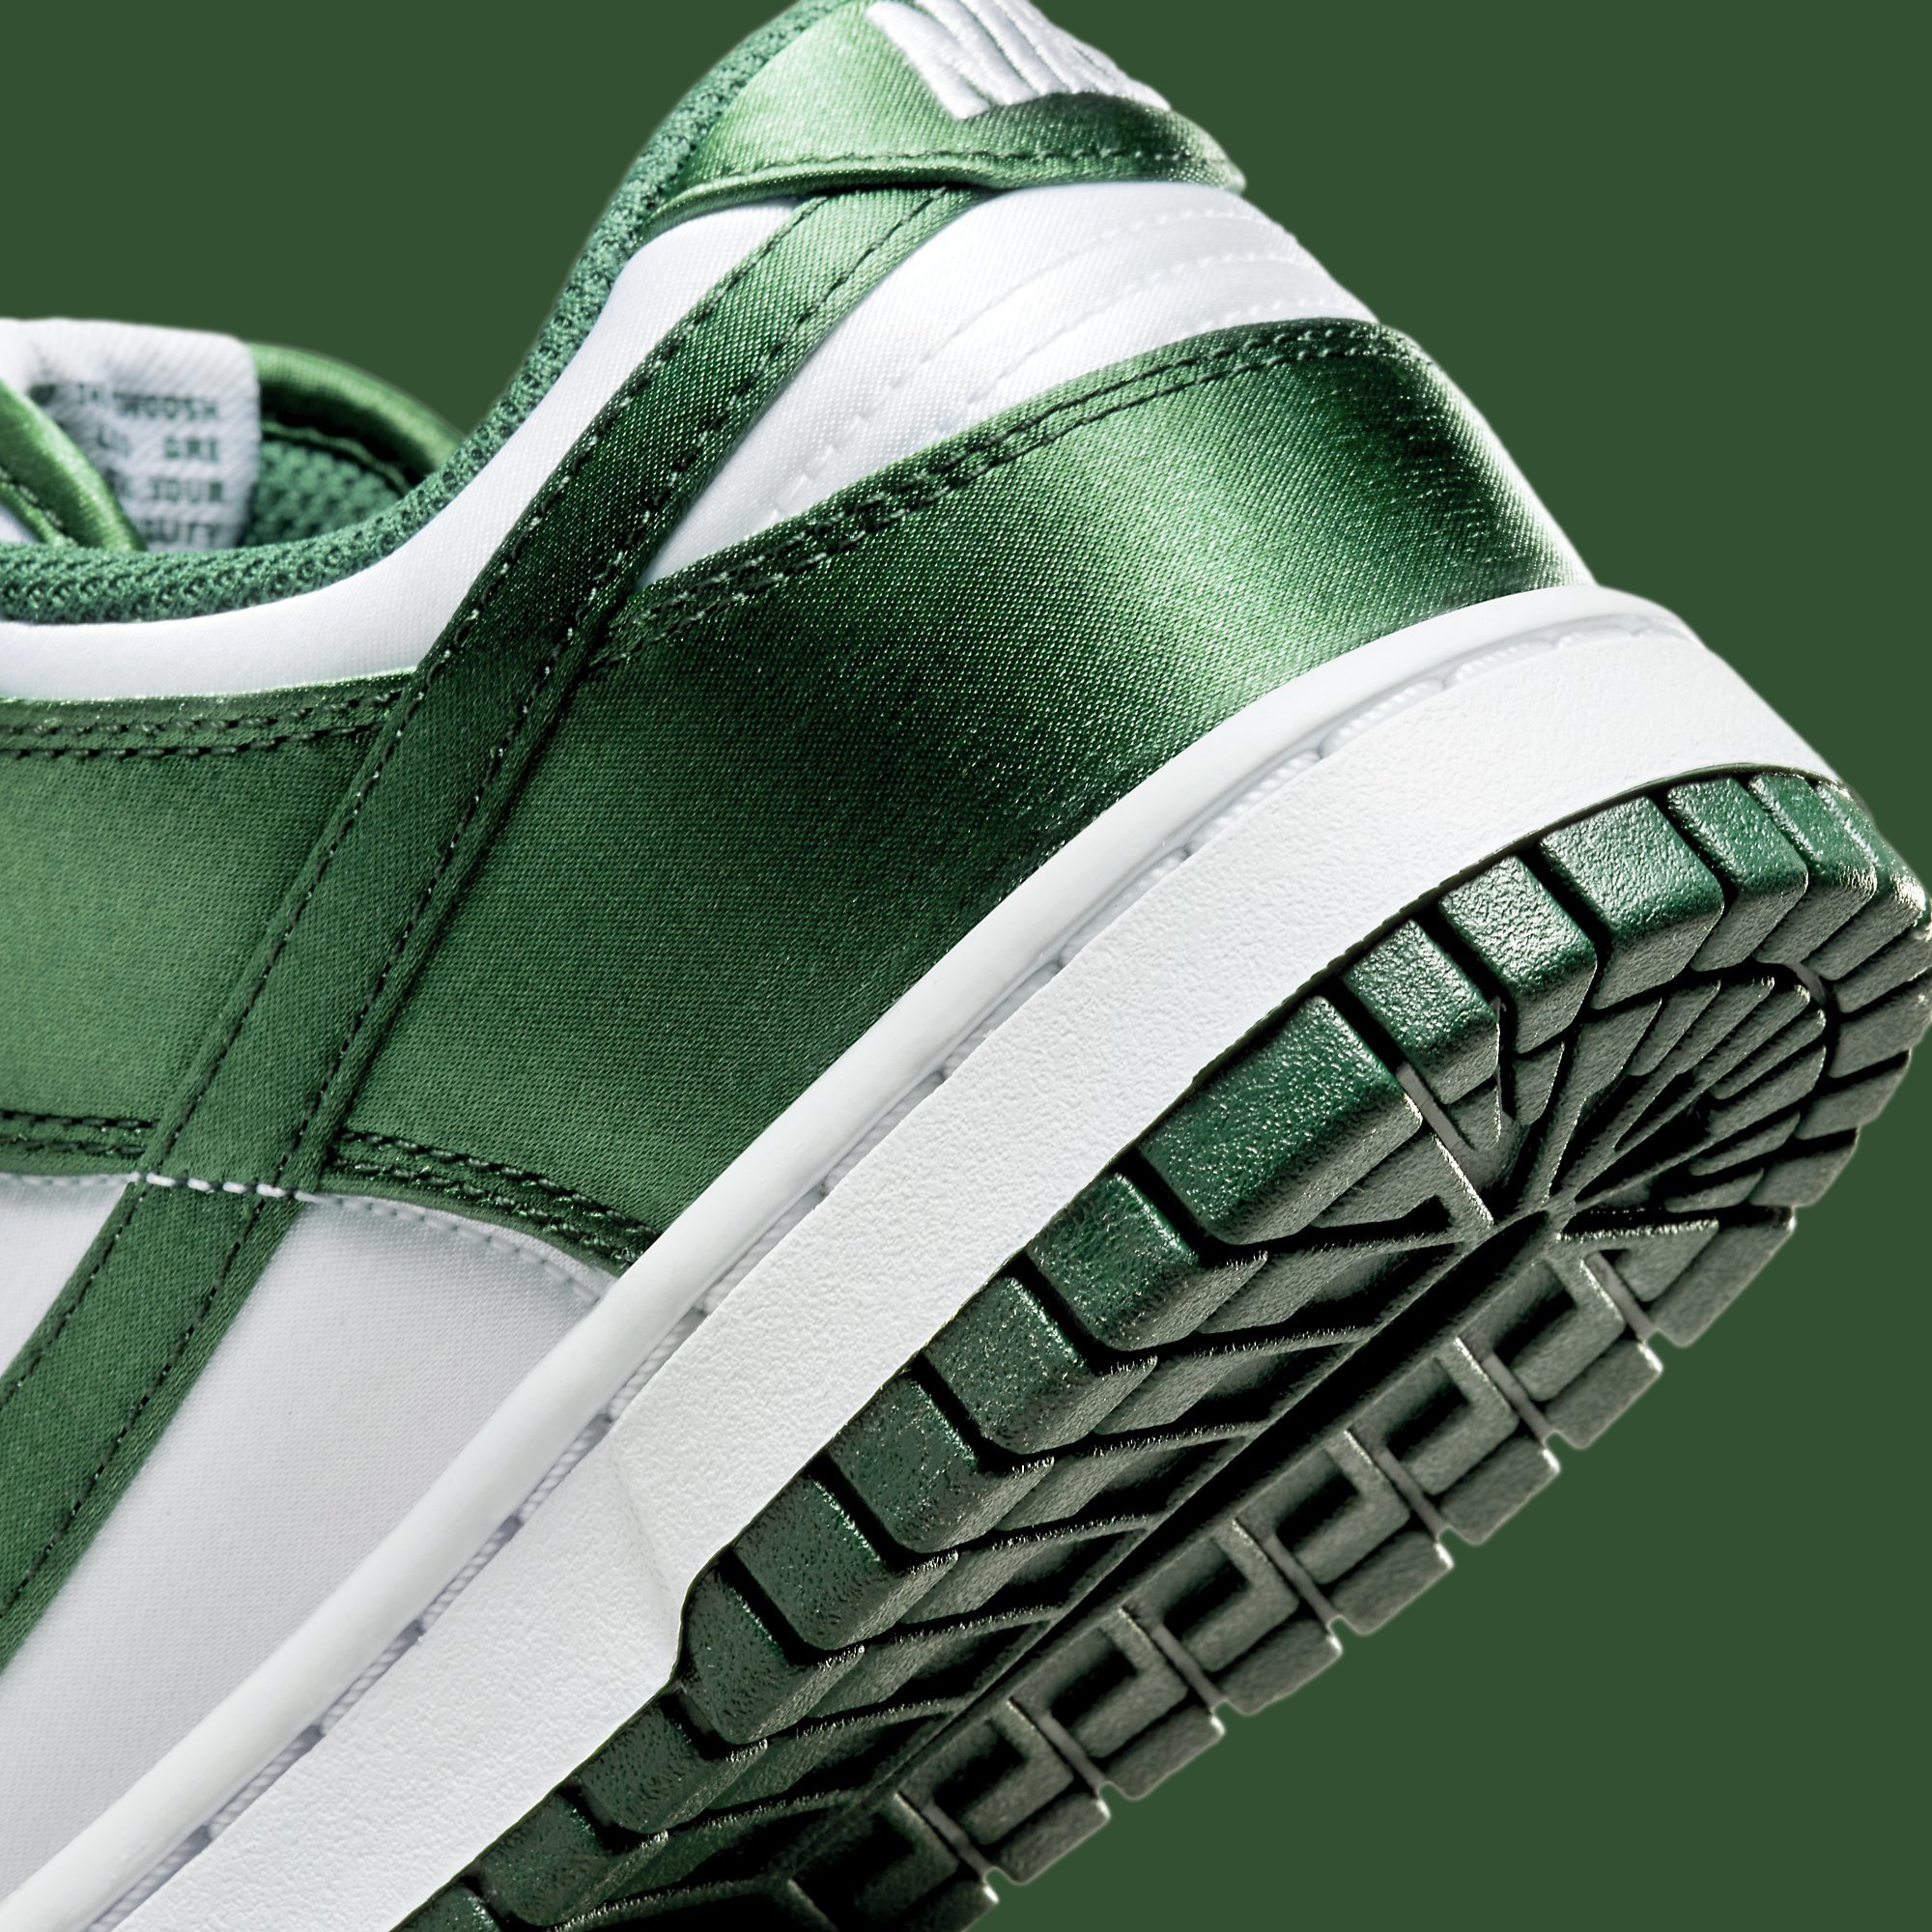 Satin Green' Nike Dunk Lows Are a Nod to Be True to Your School